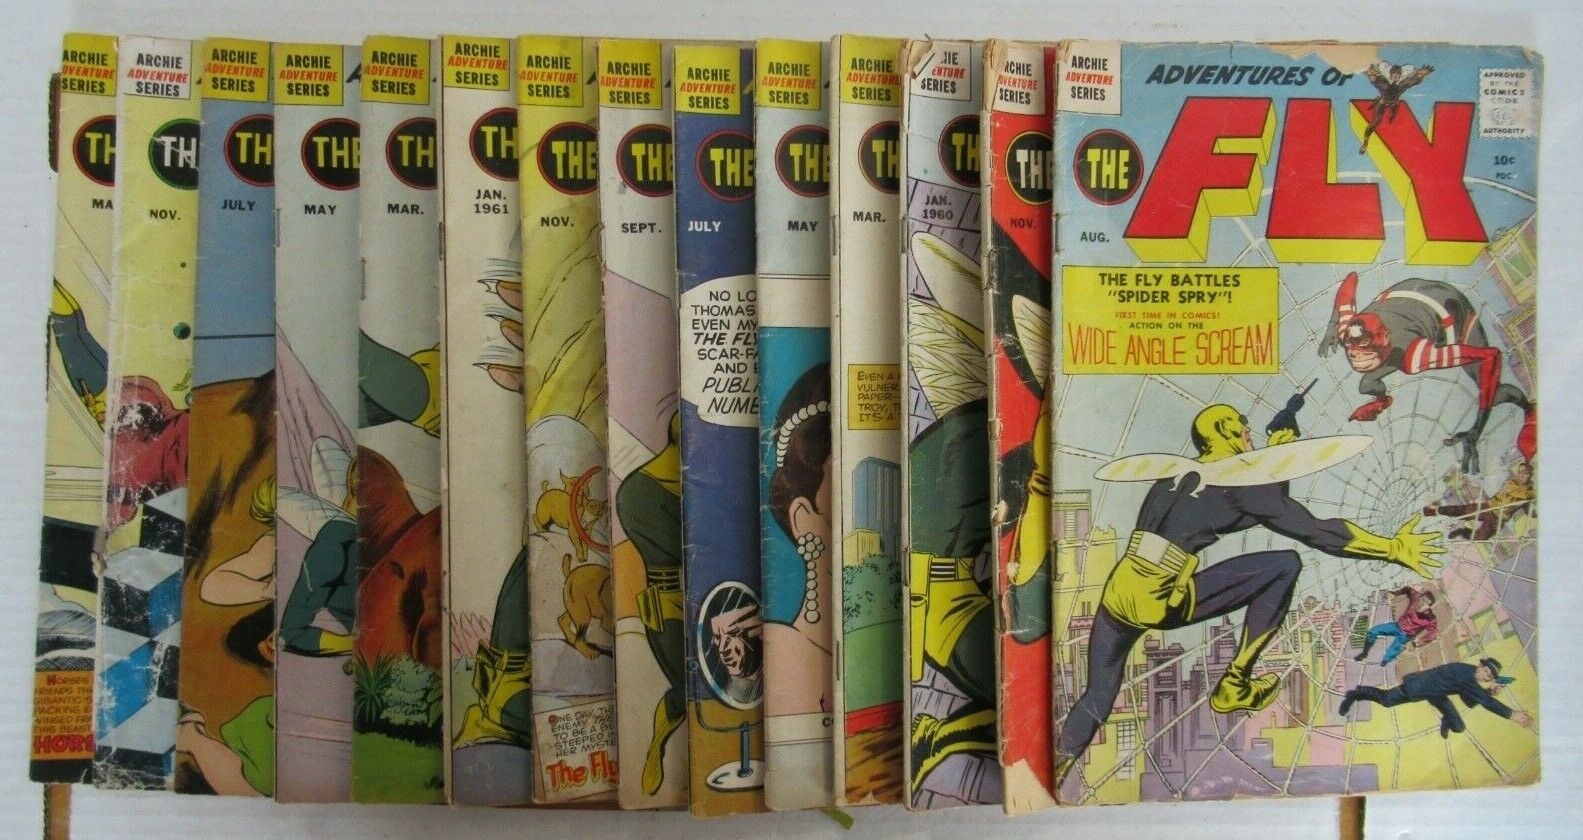 Lot 14 The Adventures Of The Fly 1 3 4 5 6 7 8 9 10 11 12 13 15 .. Readers